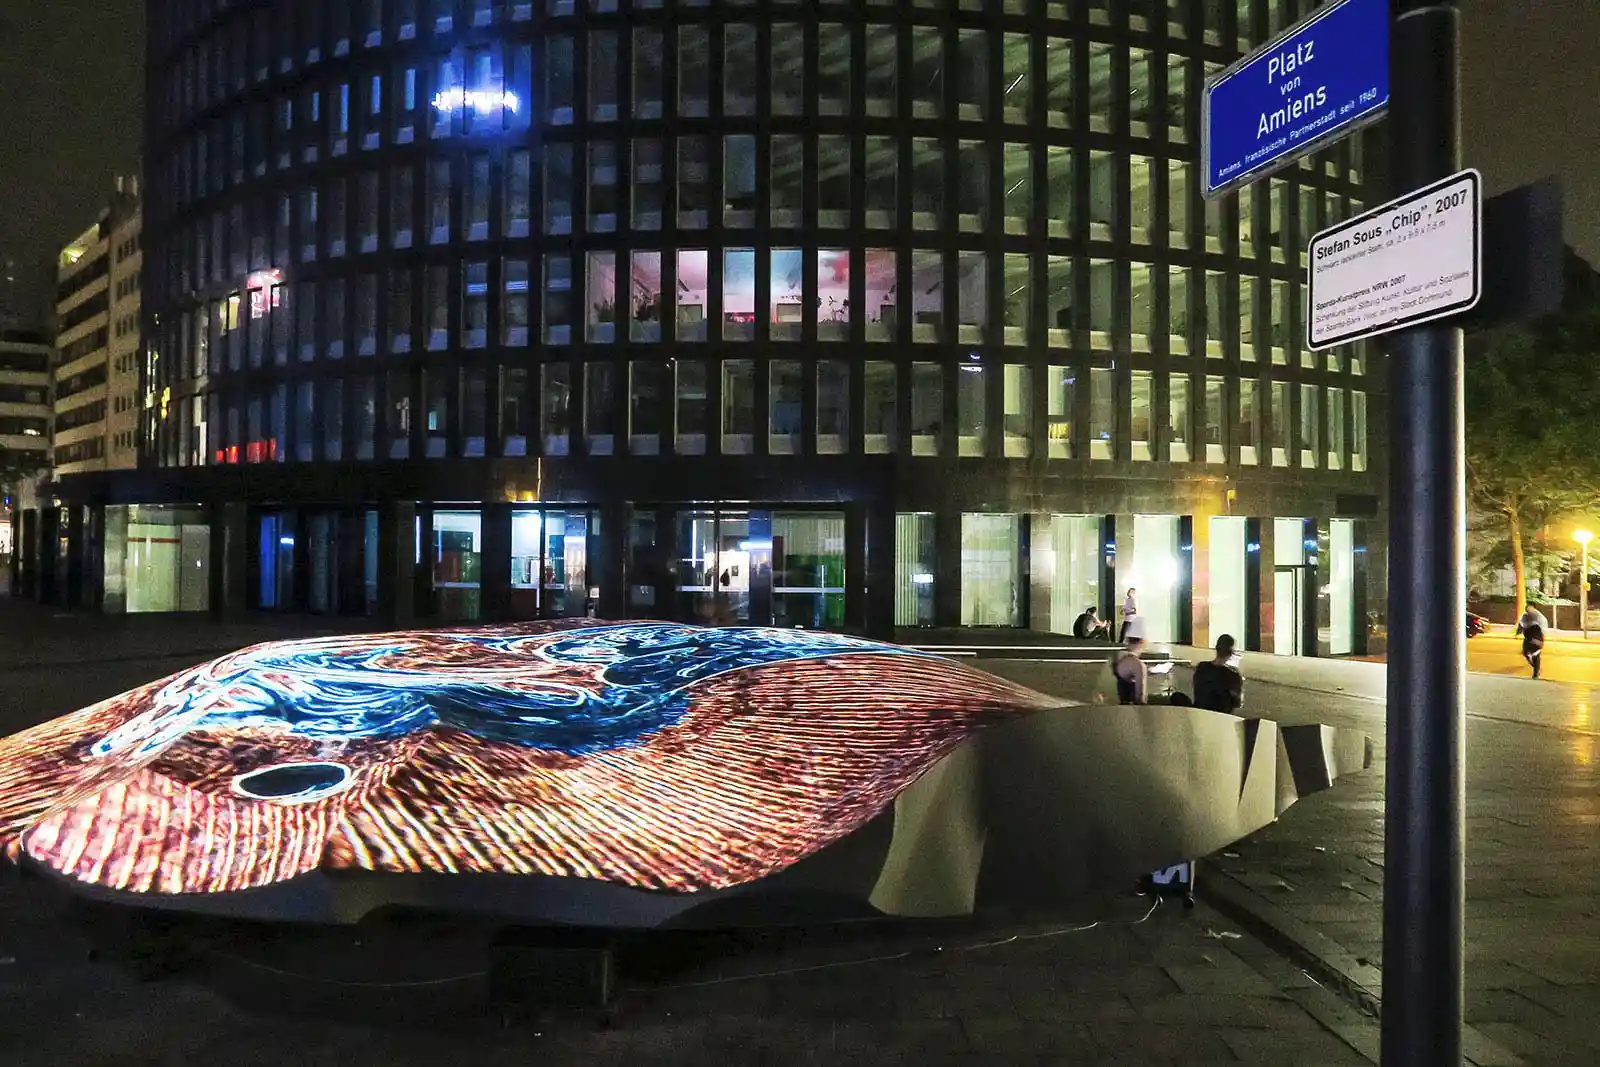 Videomapping AXIS 1.0 on the sculpture CHIP in Dortmund